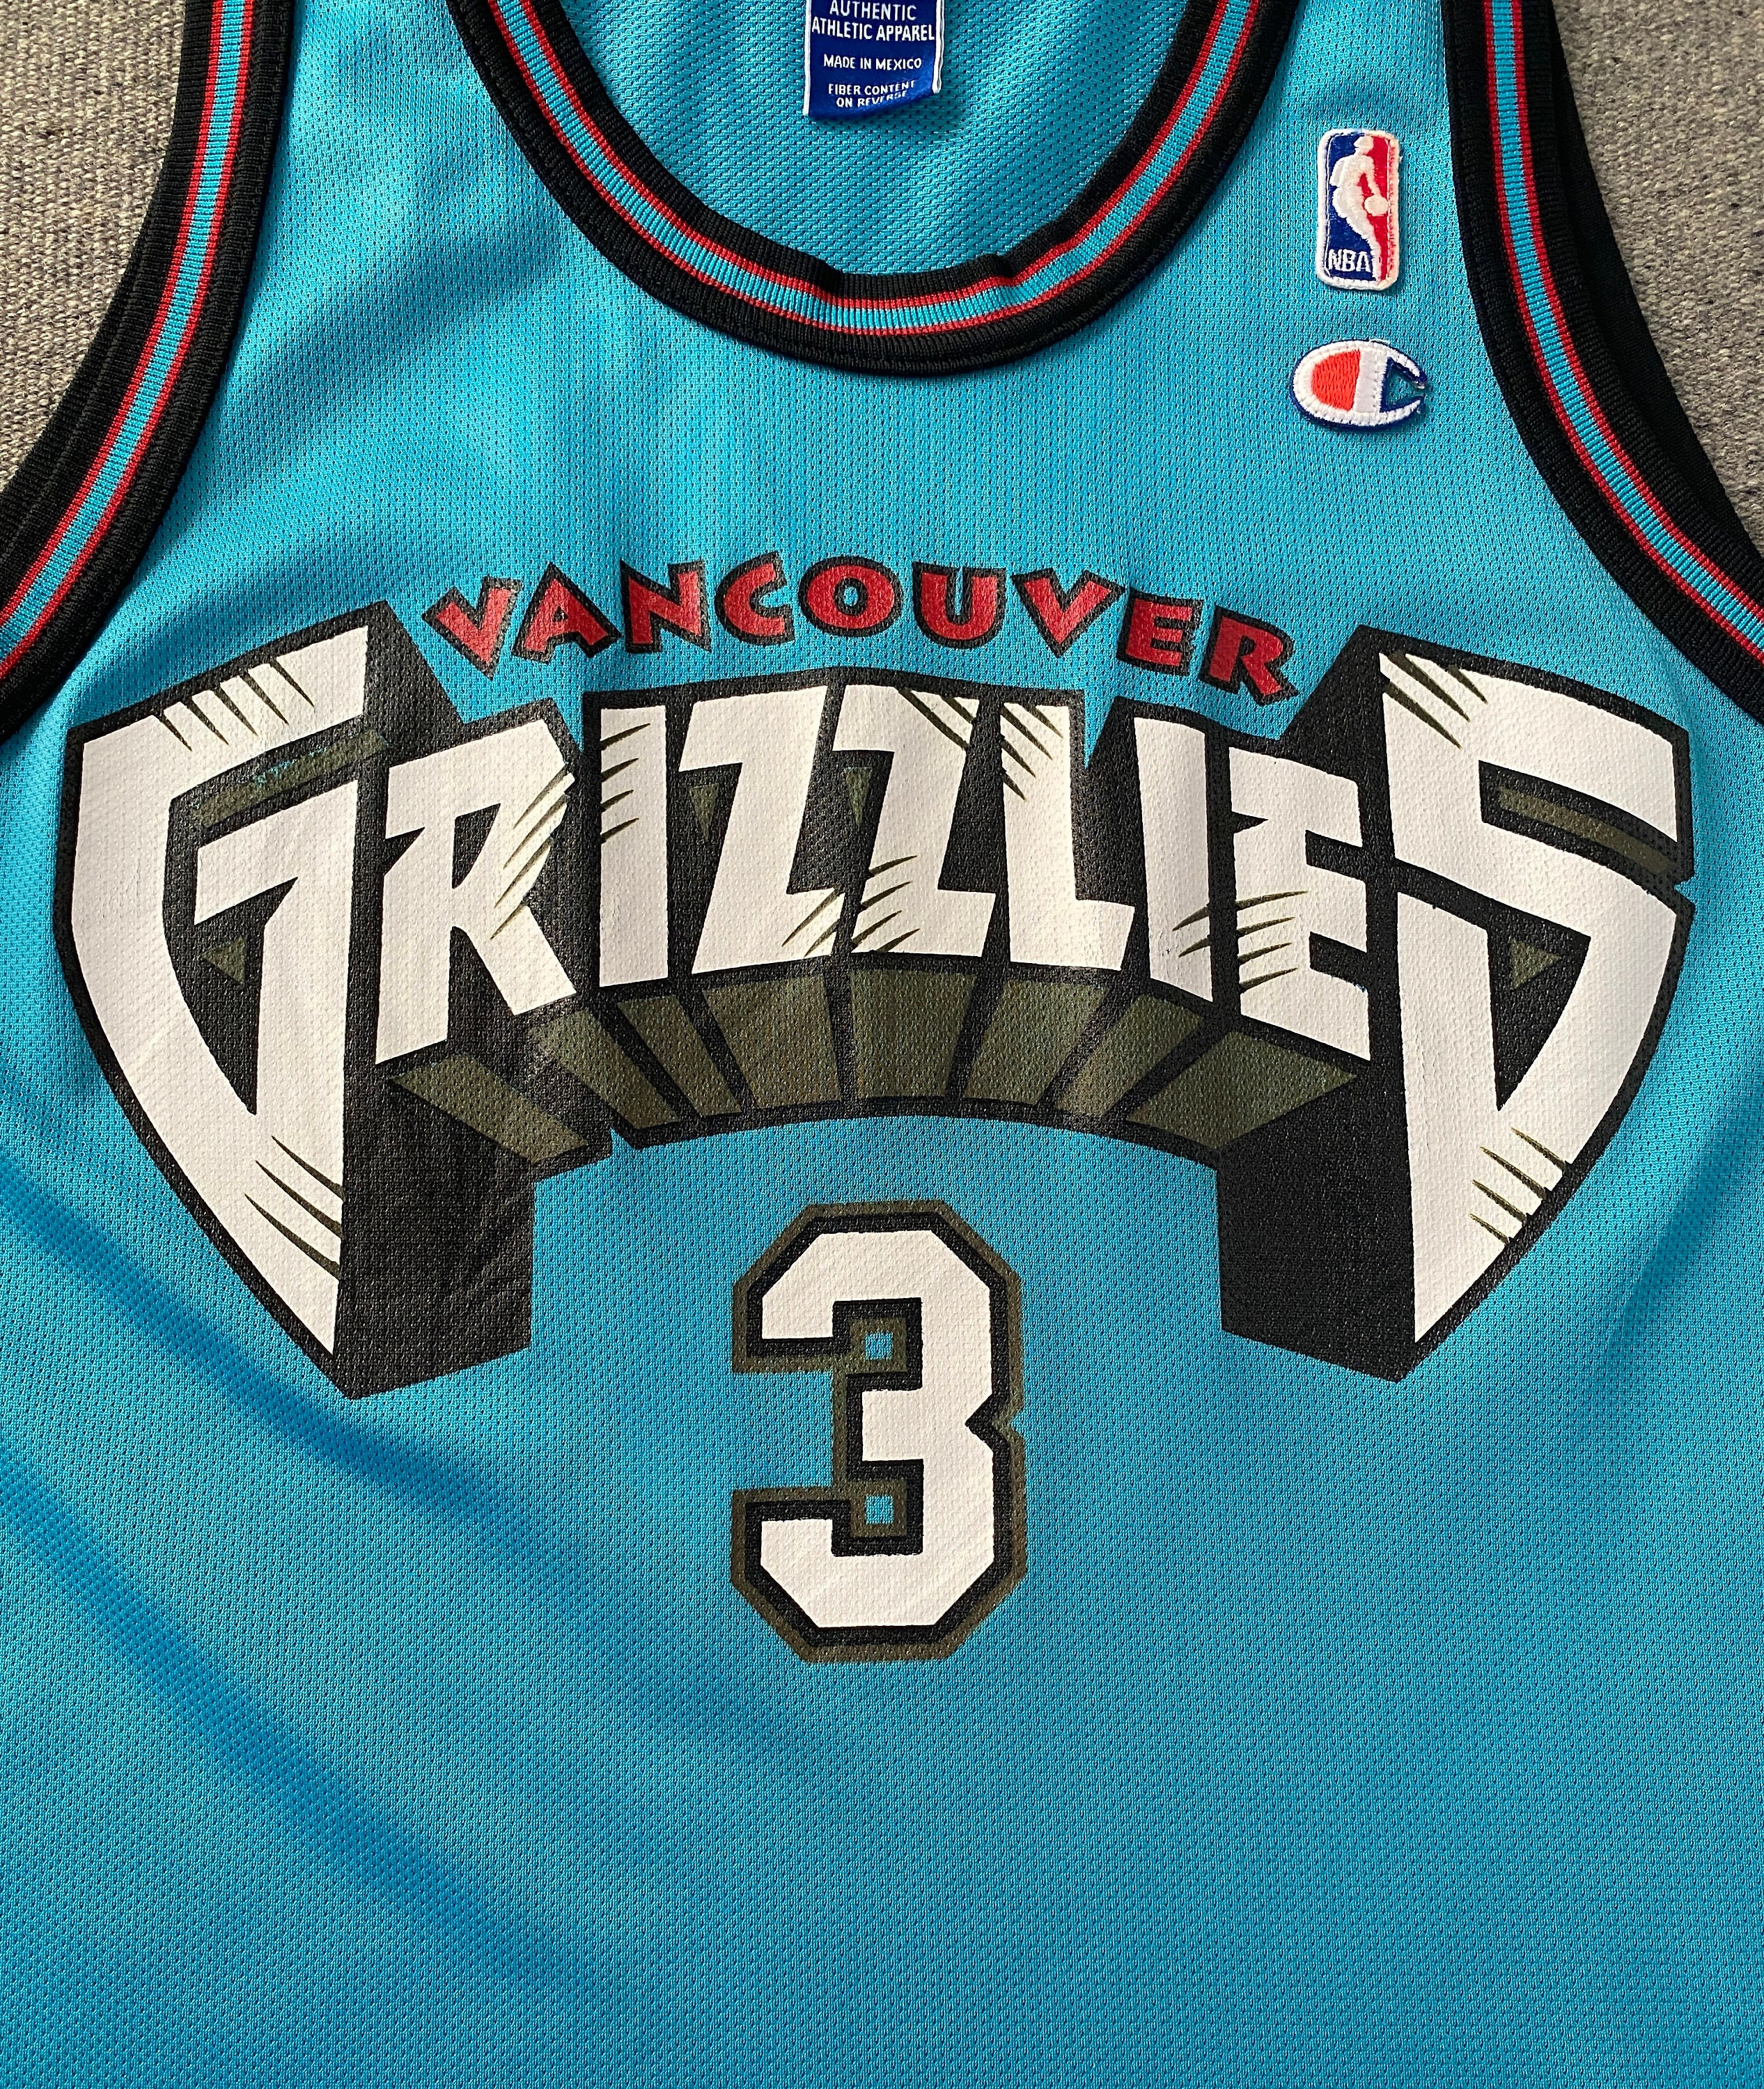 Youth Vintage Champion 10 Vancouver Grizzlies NBA Jersey Size 